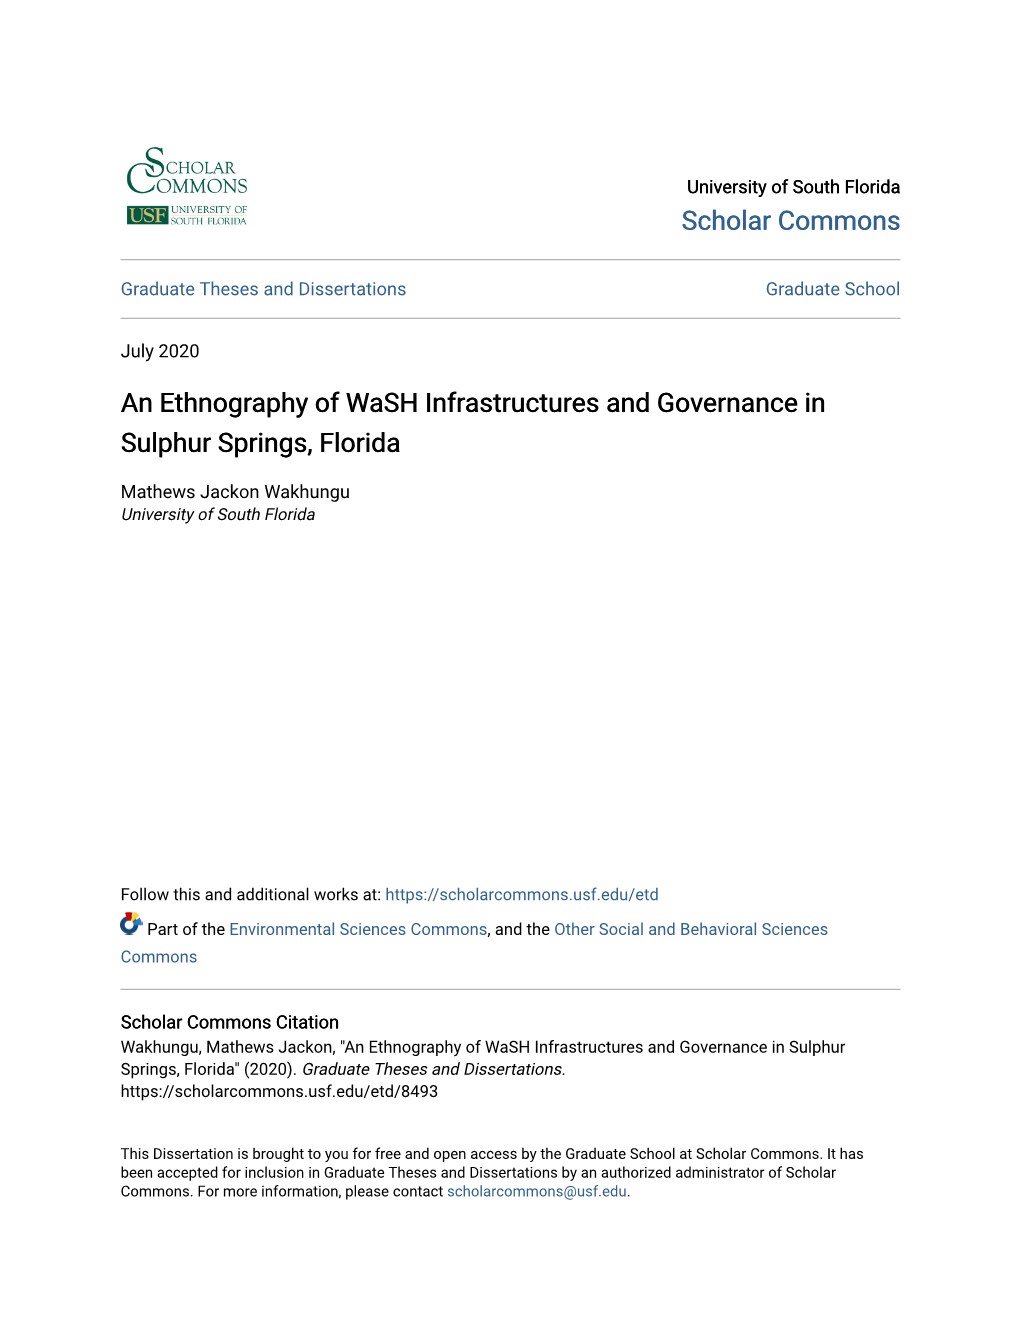 An Ethnography of Wash Infrastructures and Governance in Sulphur Springs, Florida